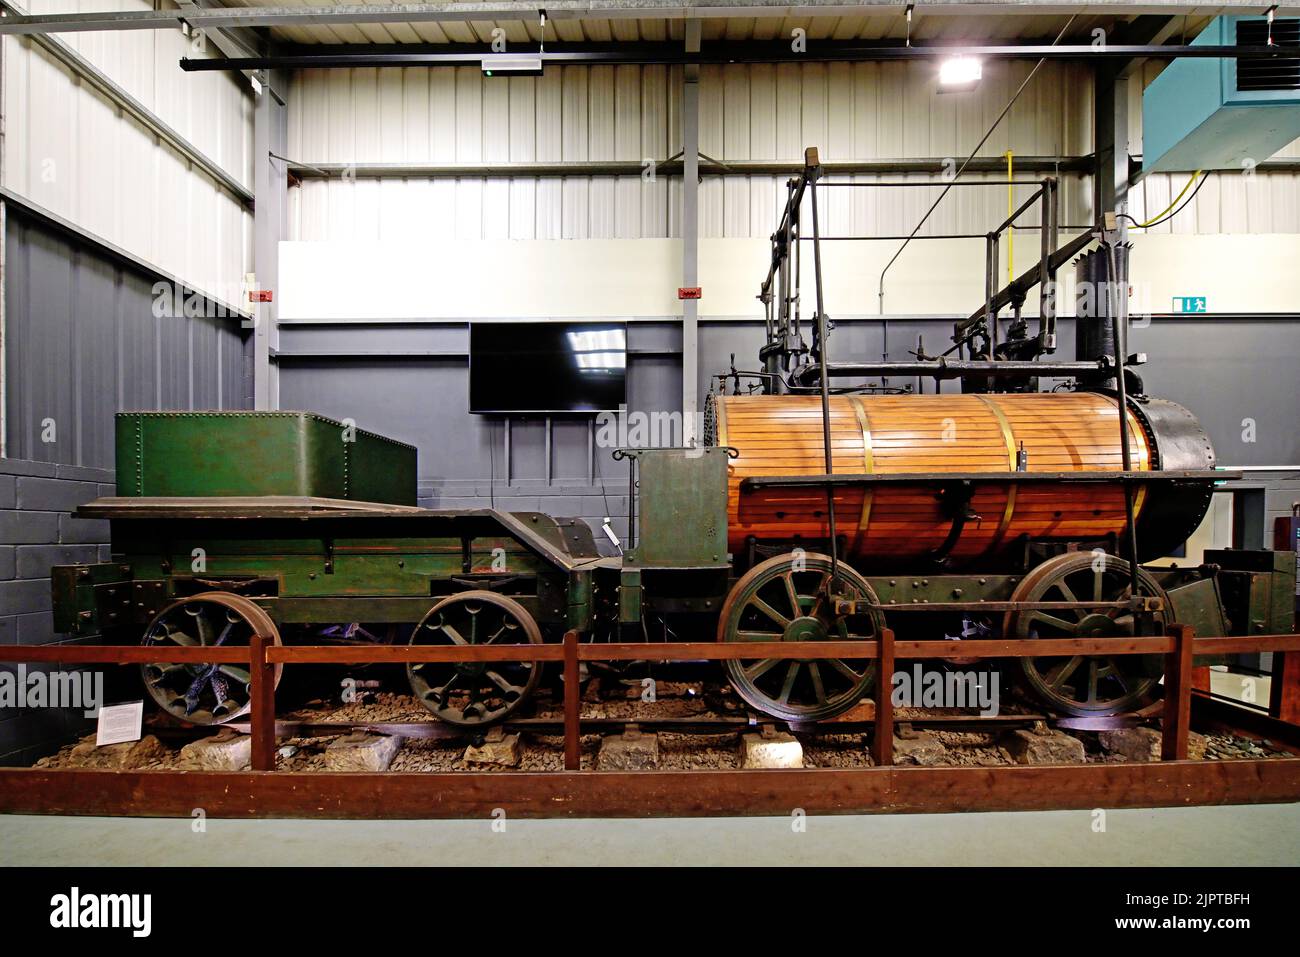 The George Stephenson steam engine Billy was fabricated and built at Killingworth Colliery West Moor workshops in around 1816 and used to haul wagons Stock Photo